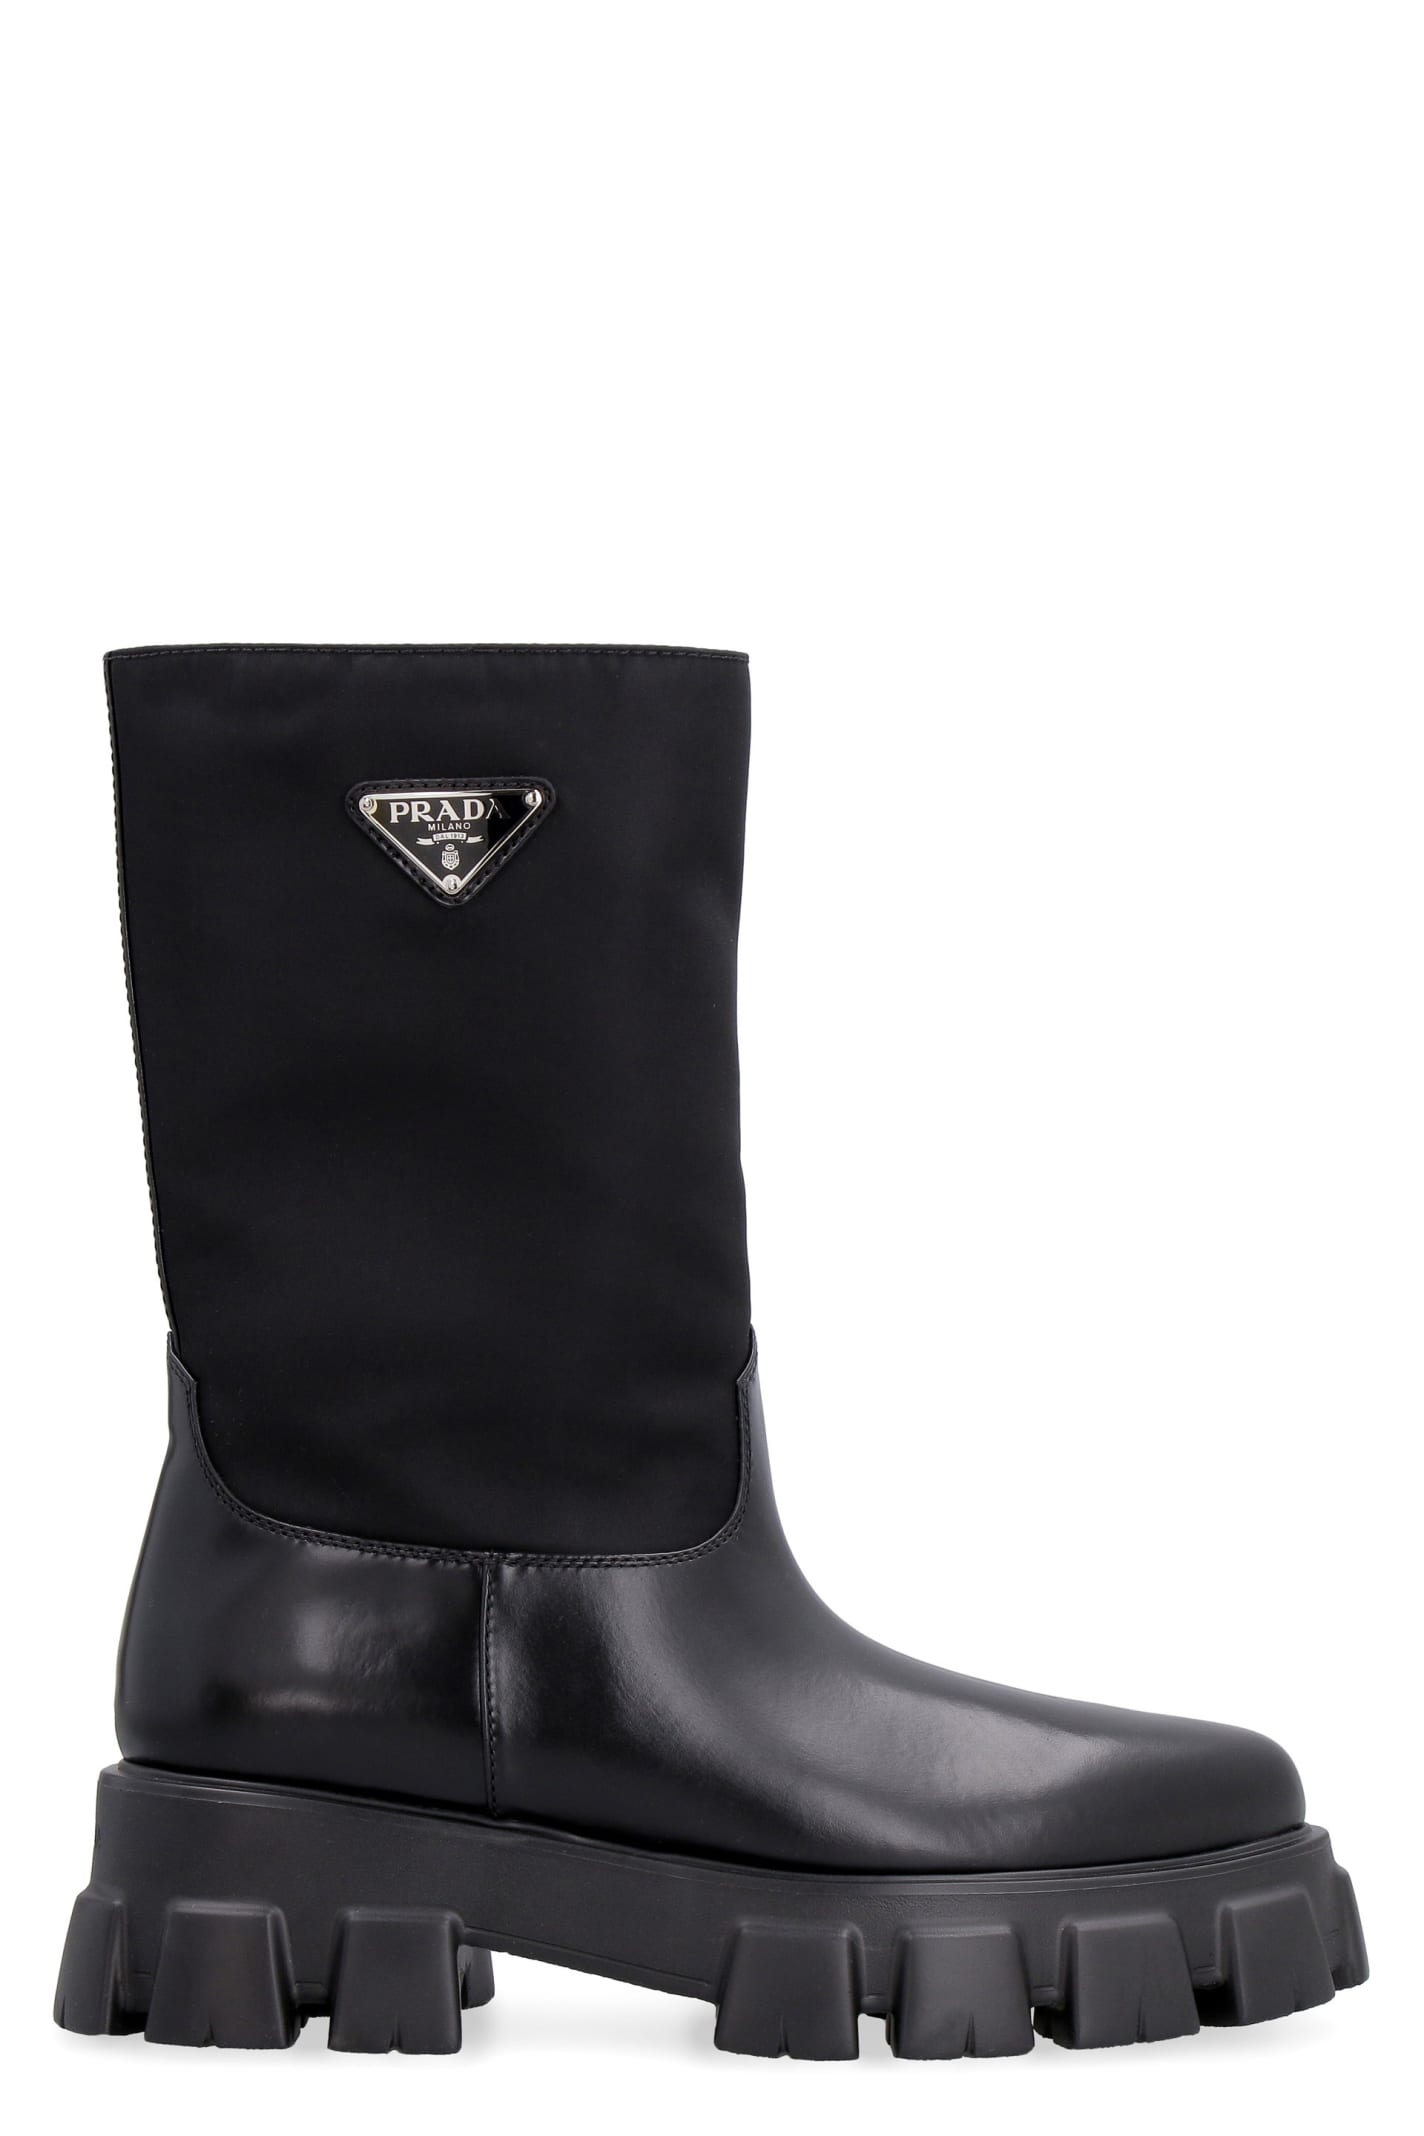 Prada Leather And Fabric Boots